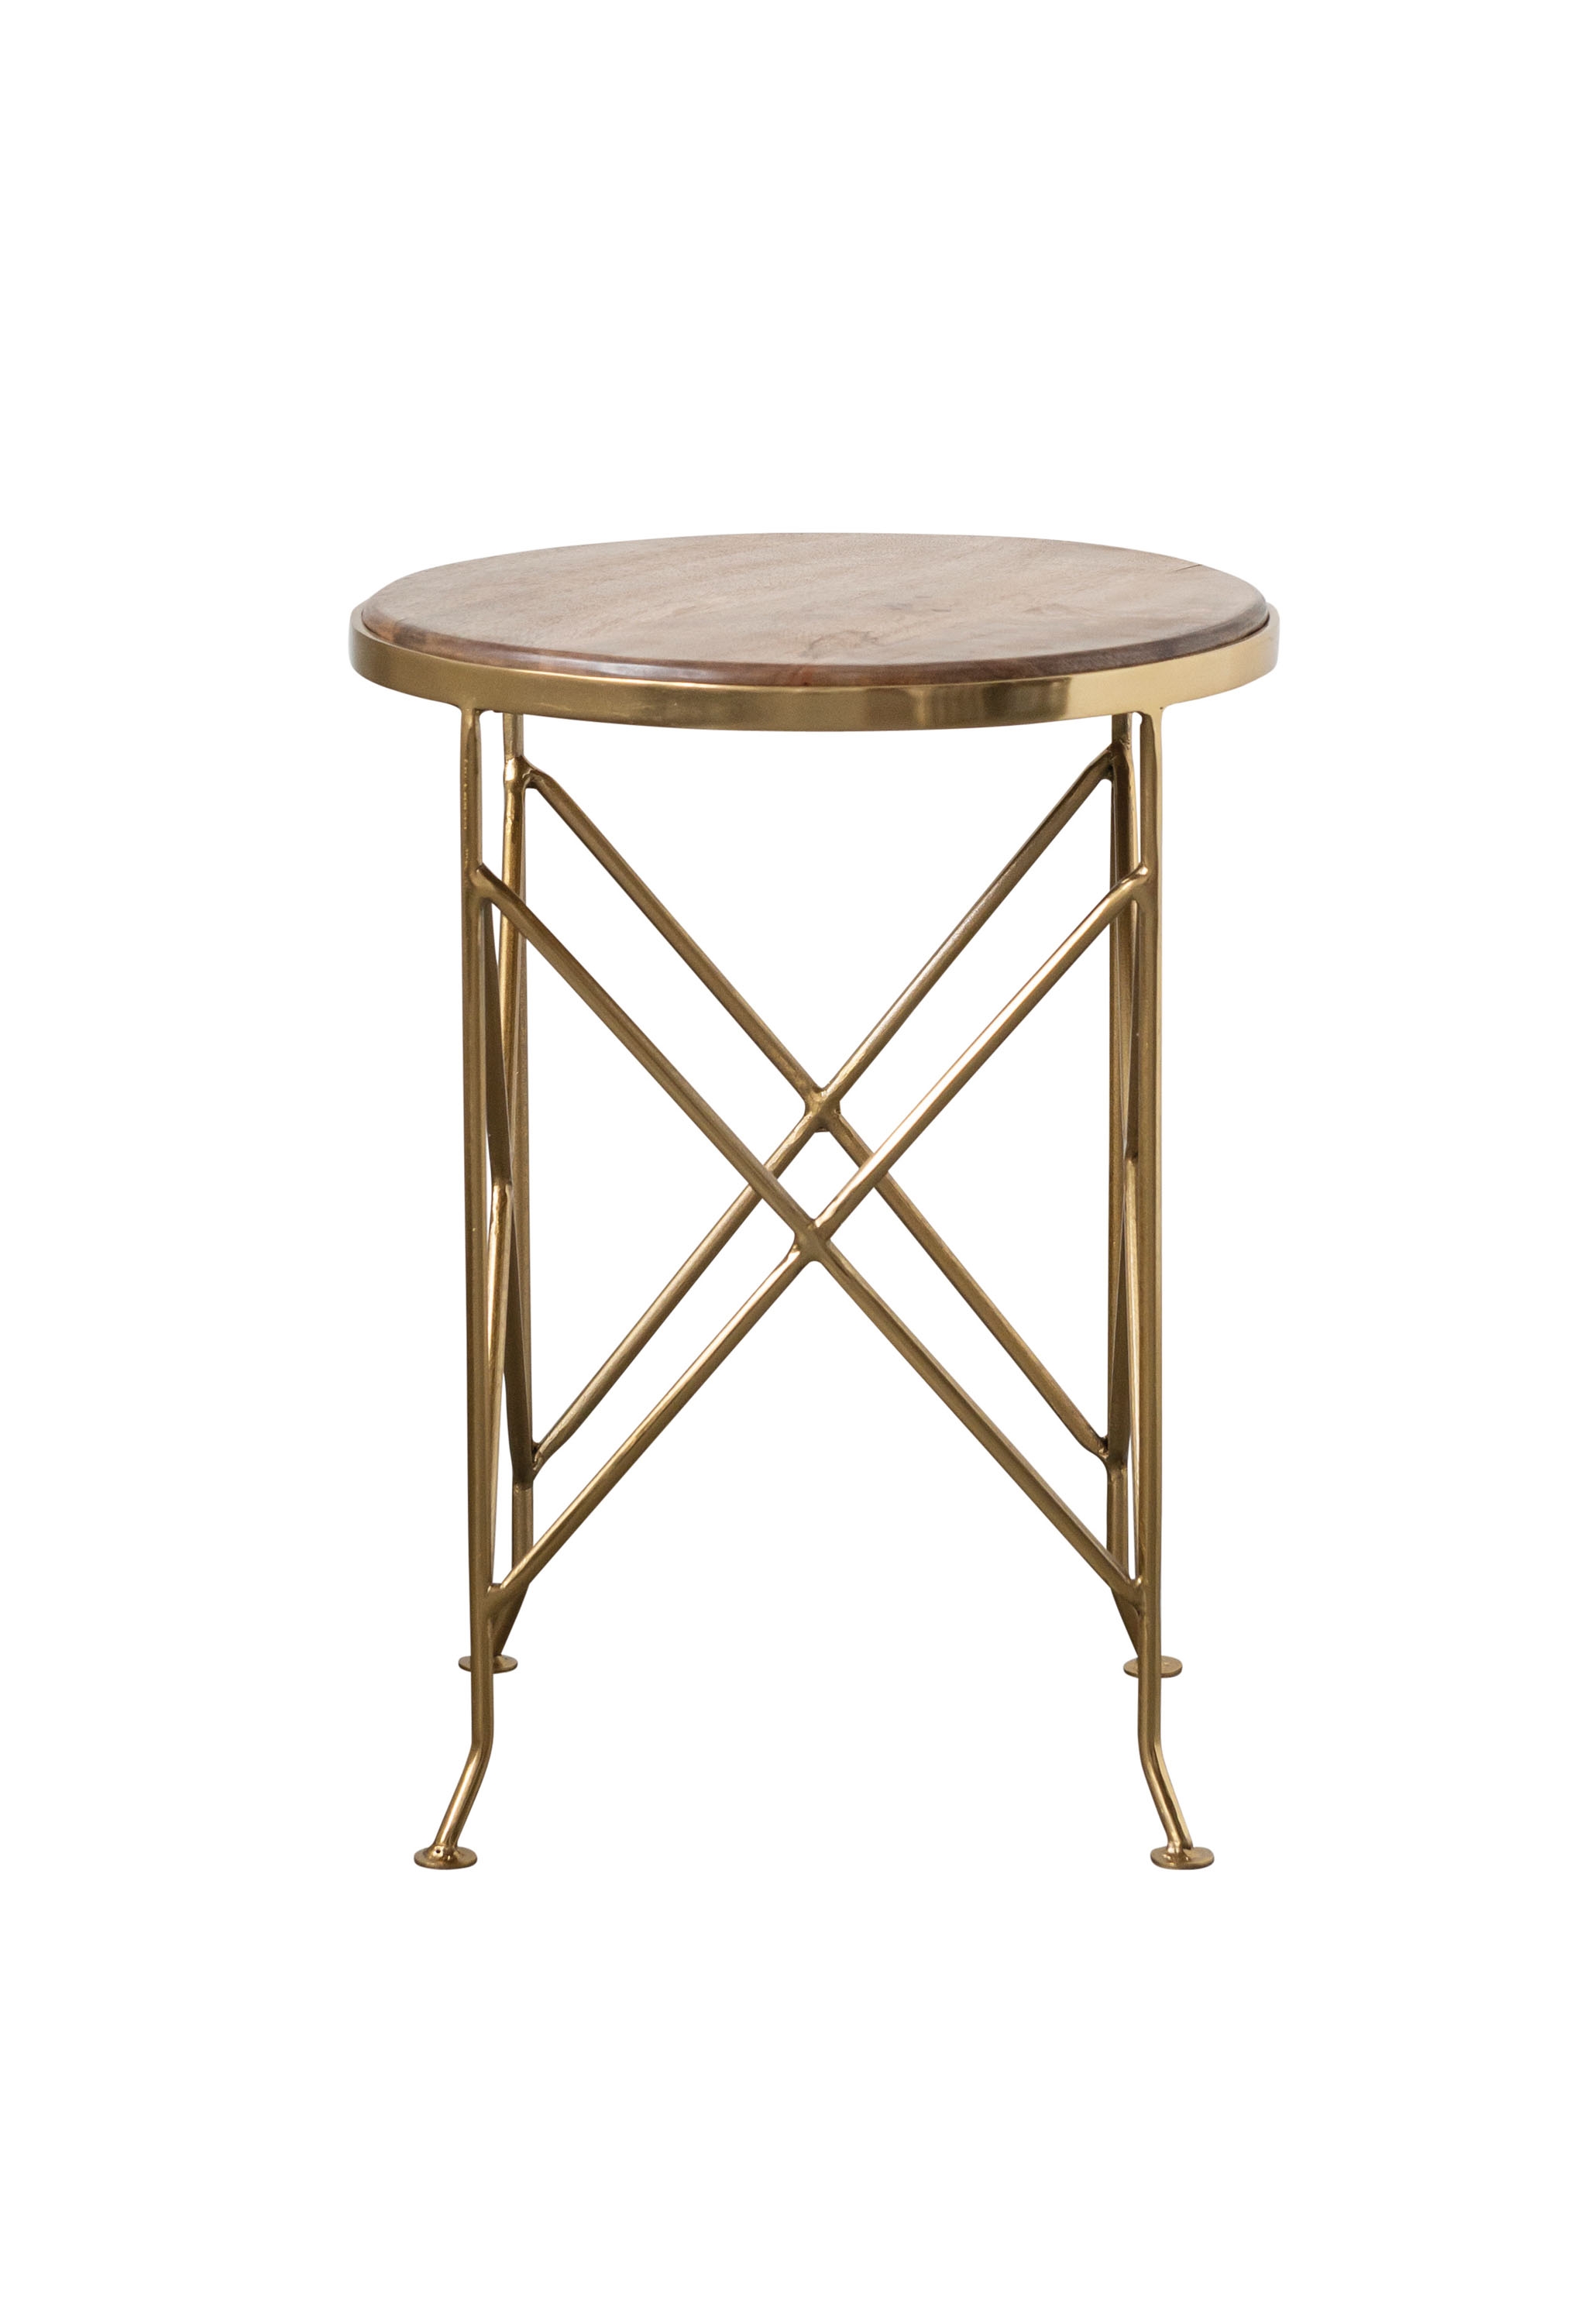 Brown Mango Wood Side Table with Gold Metal Legs - Image 0